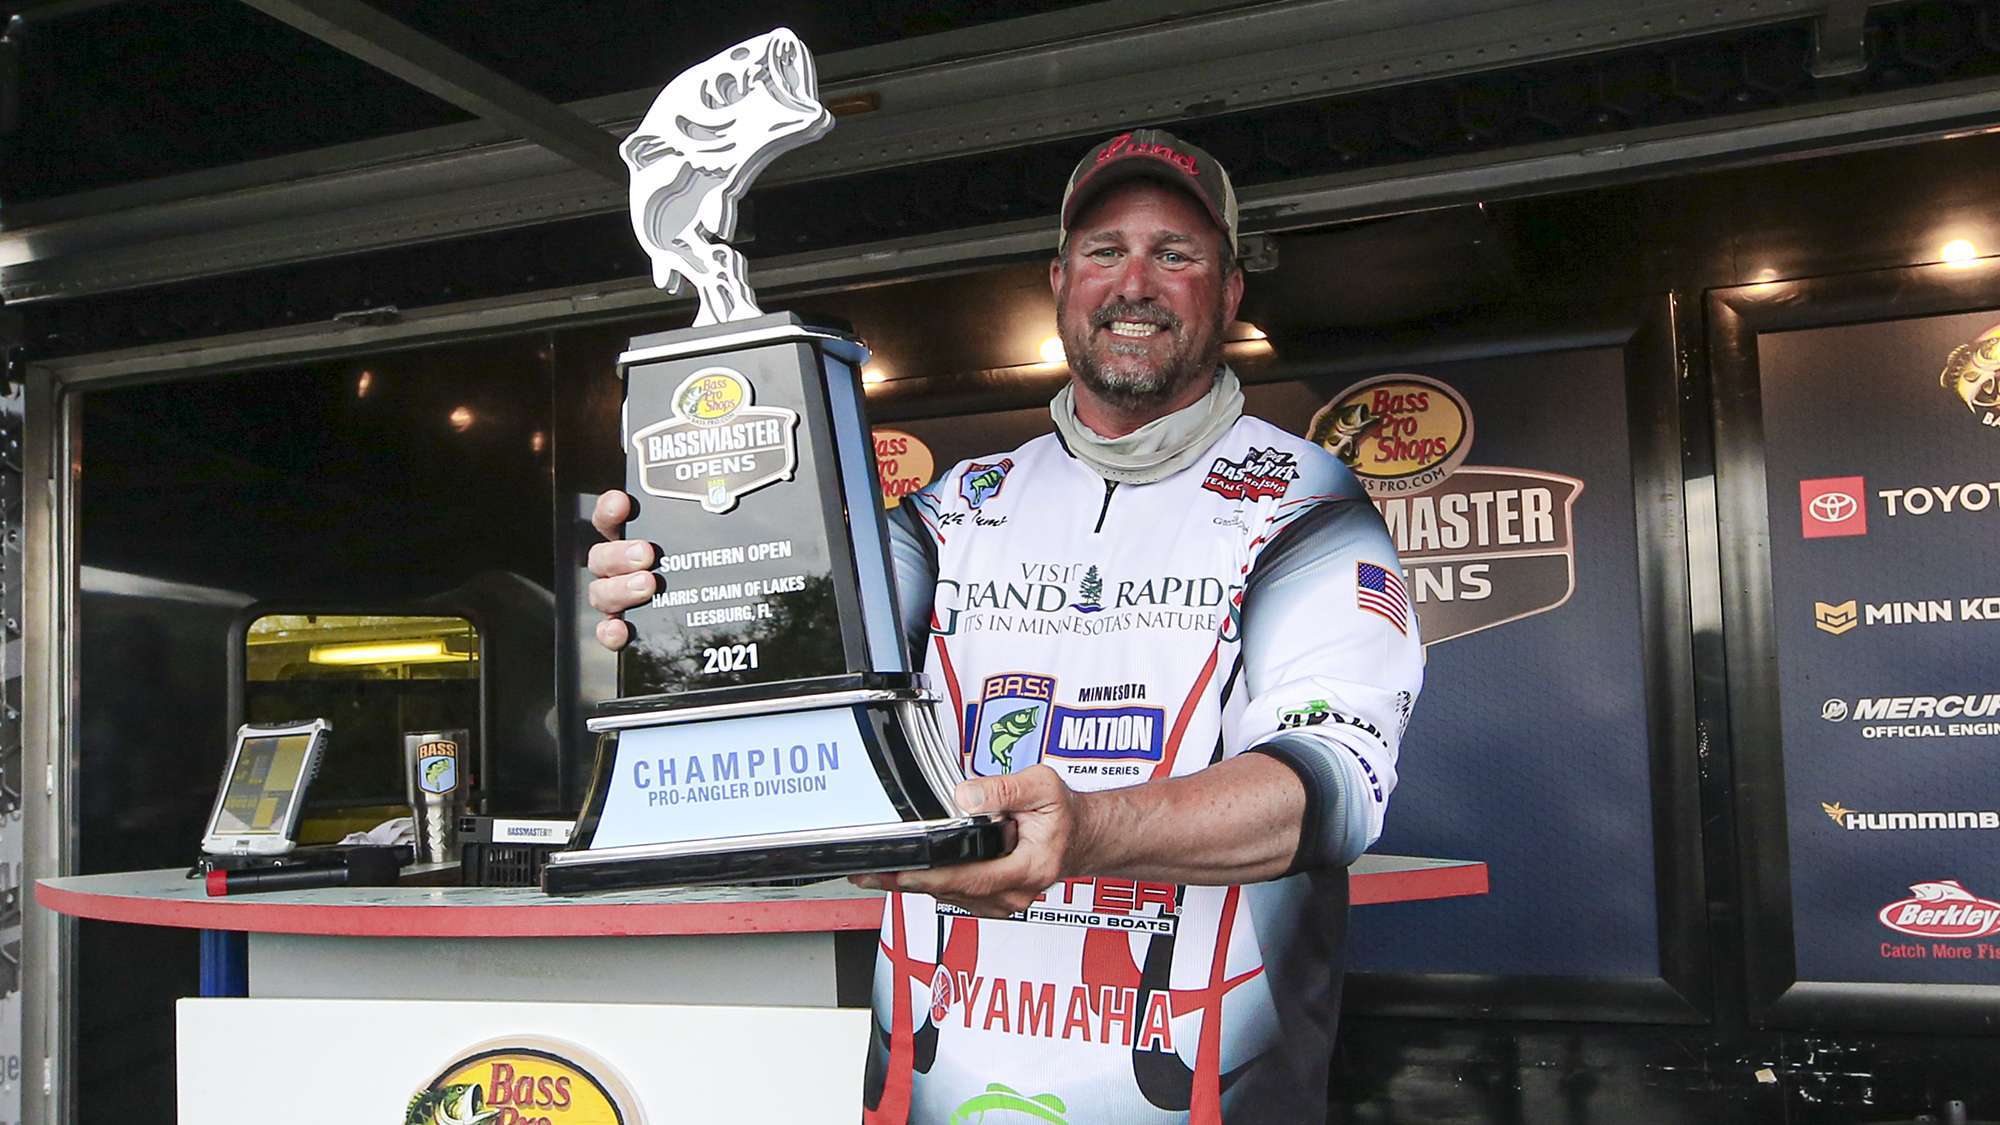 Only two anglers twice broke the magic 20-pound weight, including winner Keith Tuma, who came from 10th place to win the derby with 58-13. Tuma fished low-growing hydrilla on a flat with a bottom depth of 6 feet. A bladed jig allowed him to cover more water while working it slow to catch less active postspawn largemouth. 
